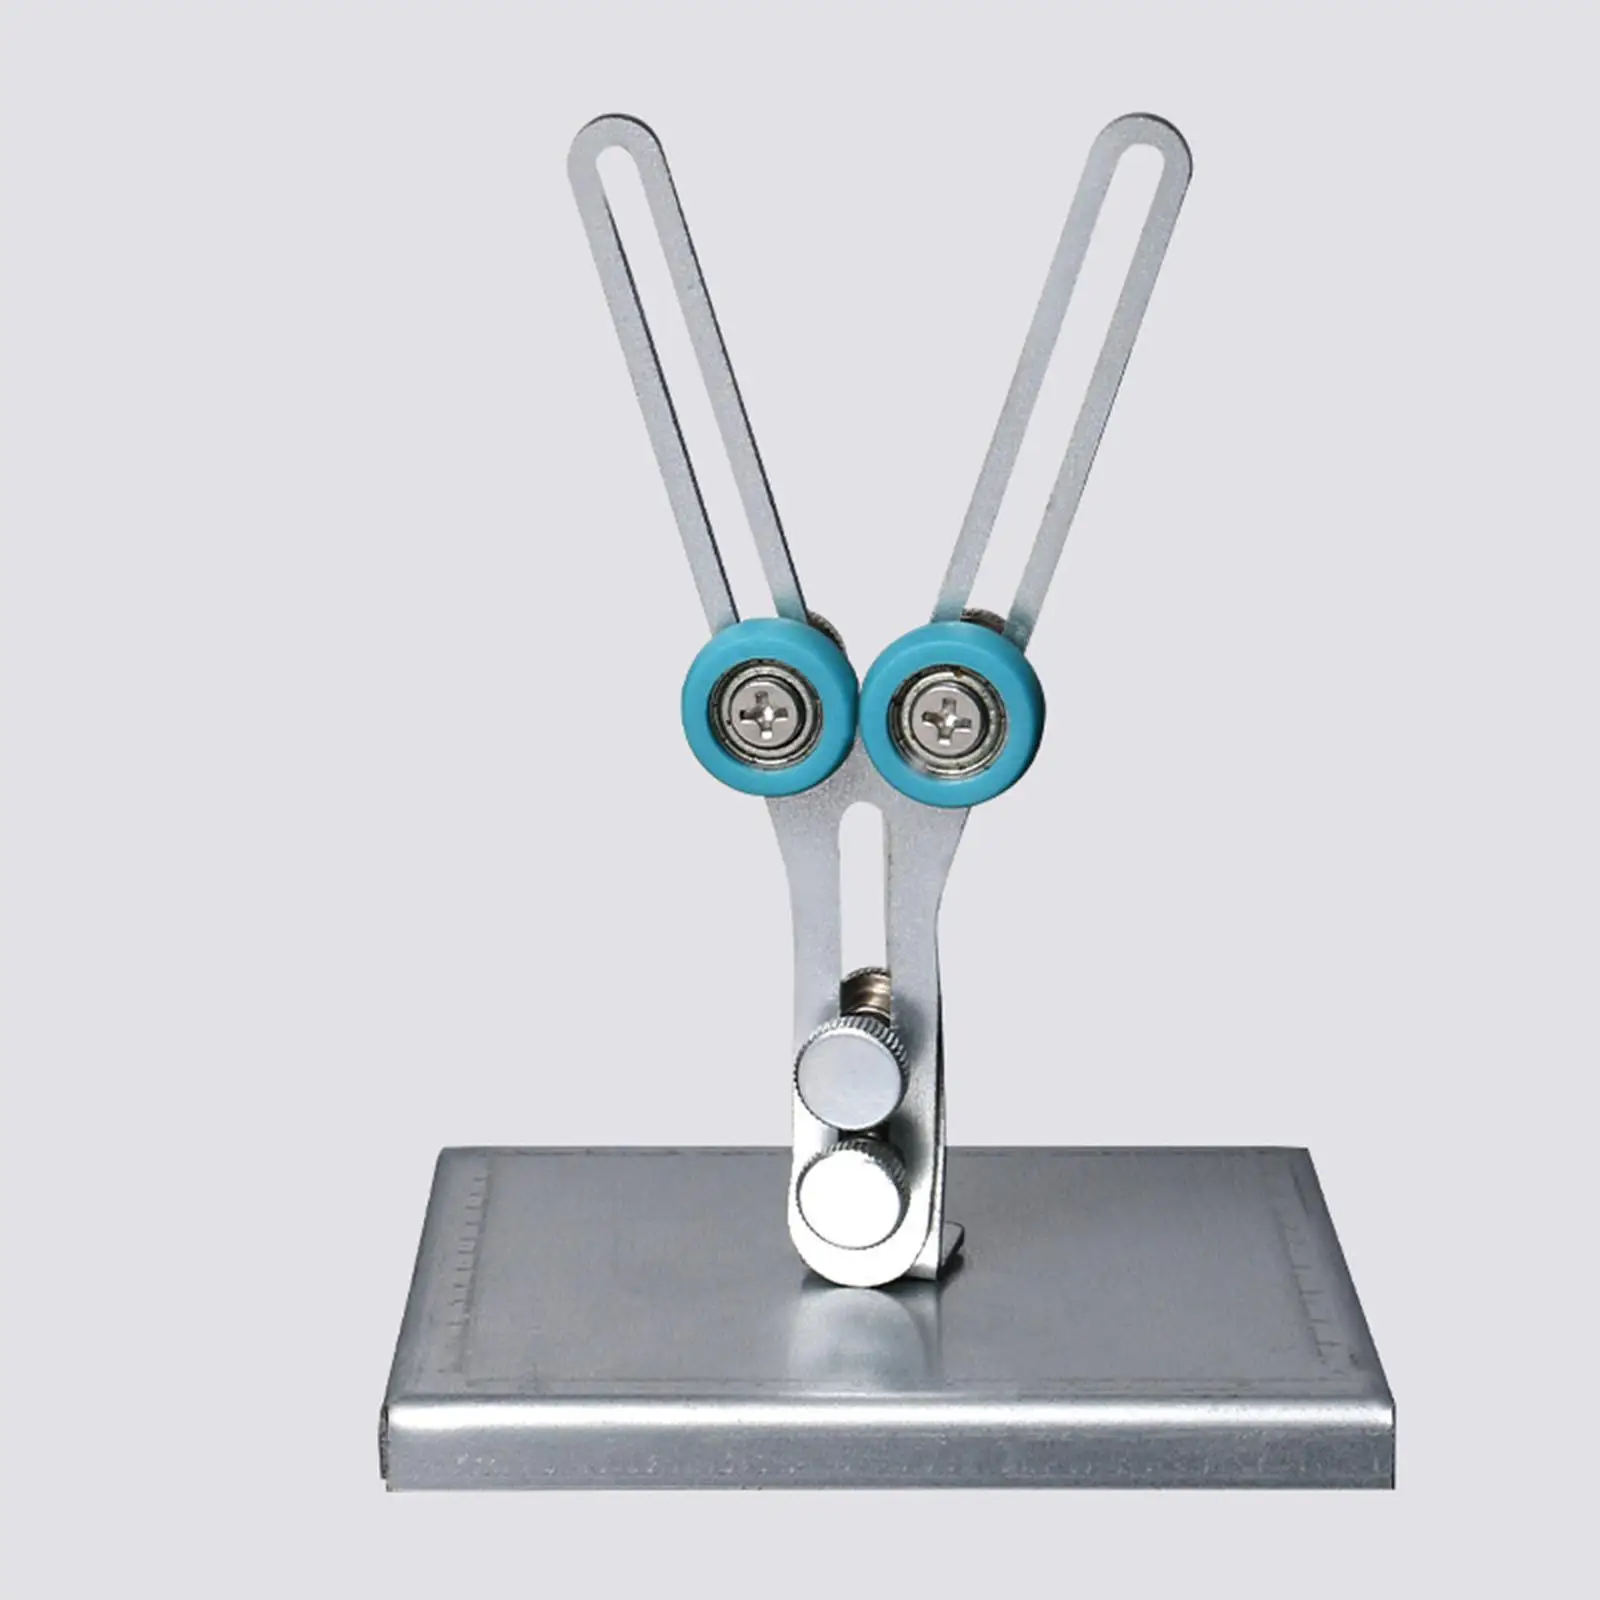  Fishing Rod  Support Stand Rack Holder for Epoxy Resin Gluing Winding